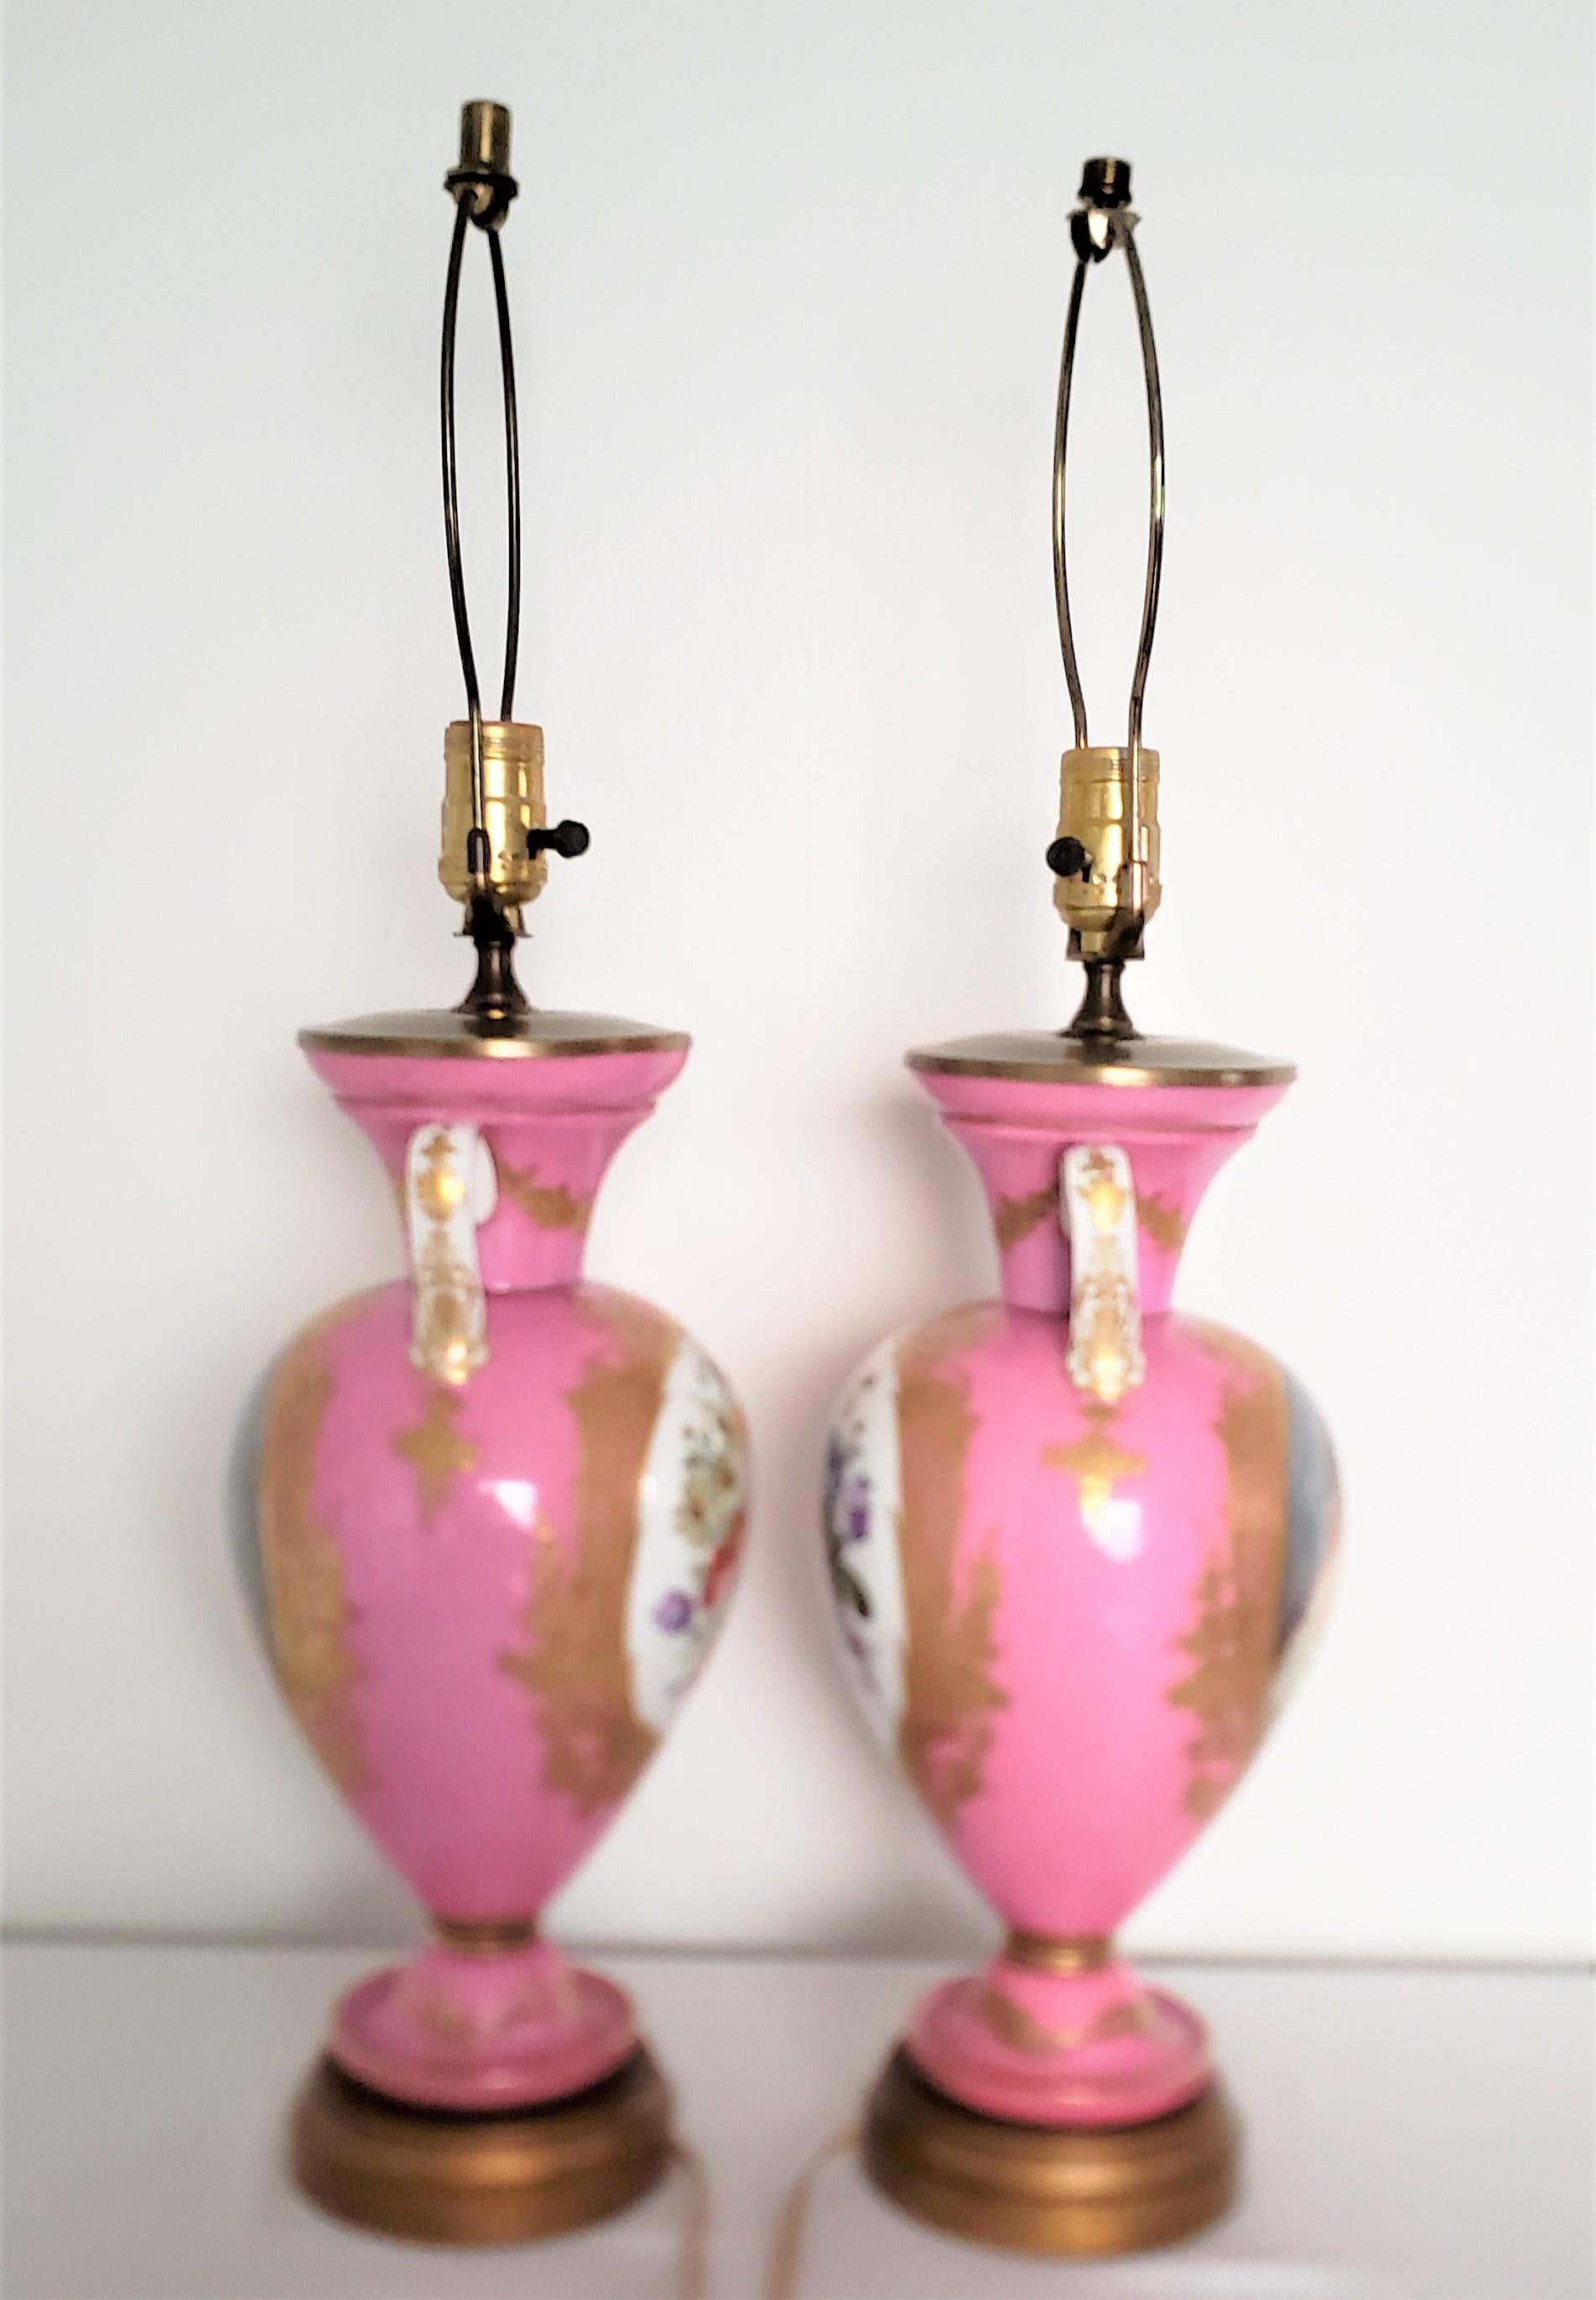 Pair of Antique French Sevres Style Hand-Painted Porcelain Pink Table Lamps  2